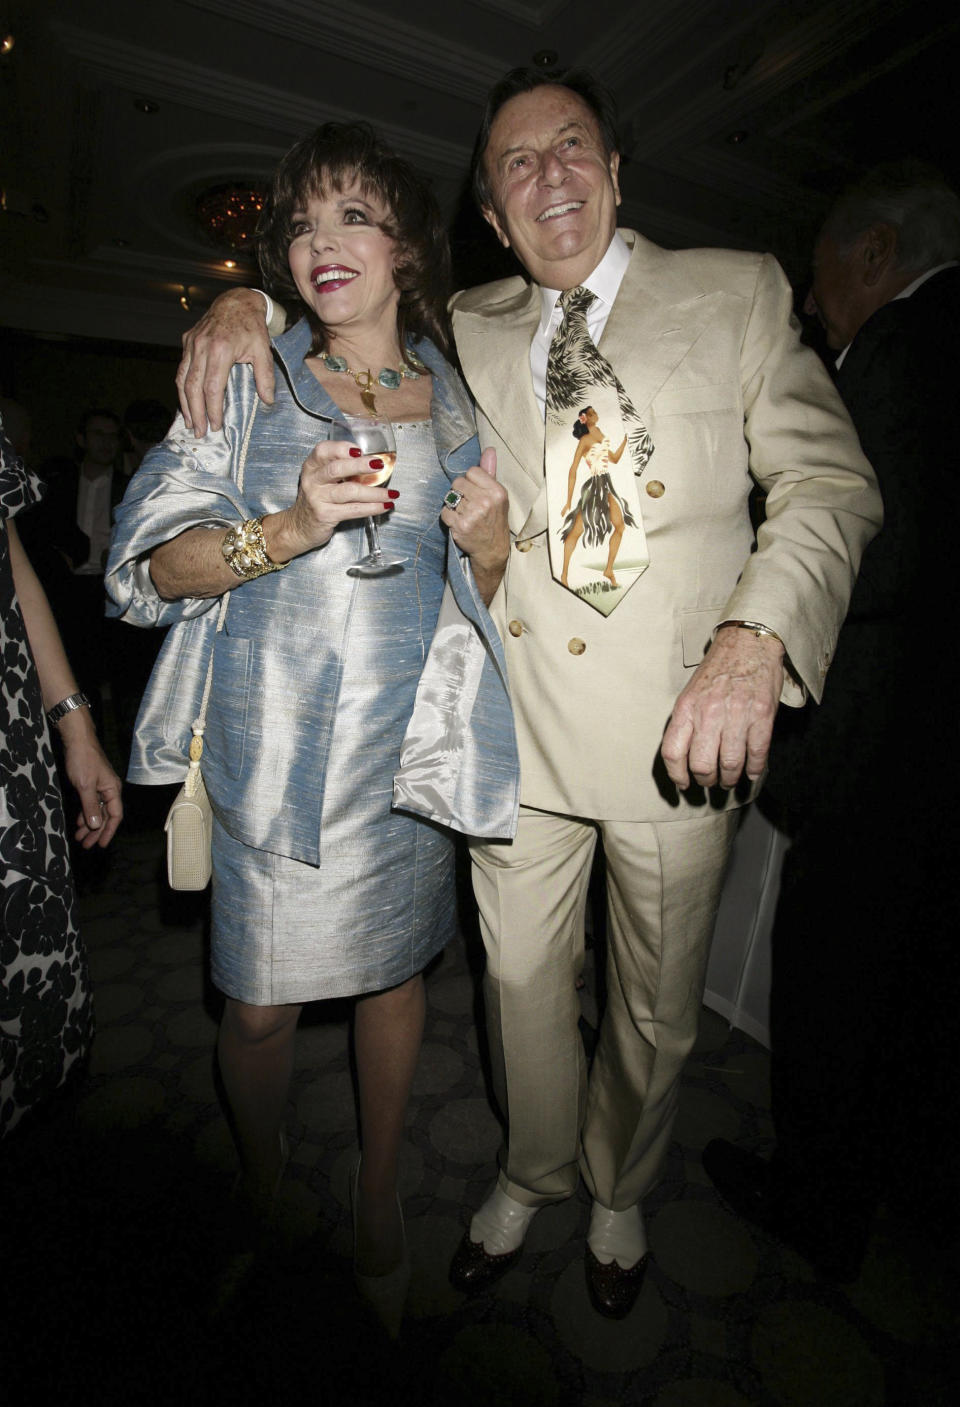 FILE - Actress Joan Collins and actor Barry Humphries pose during a party to celebrate the 180th Anniversary of weekly politics magazine The Spectator, held at the Churchill Hyatt Hotel in central London, May 7, 2008. Tony Award-winning comedian Barry Humphries, internationally renowned for his garish stage persona Dame Edna Everage, a condescending and imperfectly-veiled snob whose evolving character has delighted audiences over seven decades, has died on Saturday, April 22, 2023, after spending several days in a Sydney hospital with complications following hip surgery, a Sydney hospital said. (Yui Mok/PA via AP, File)